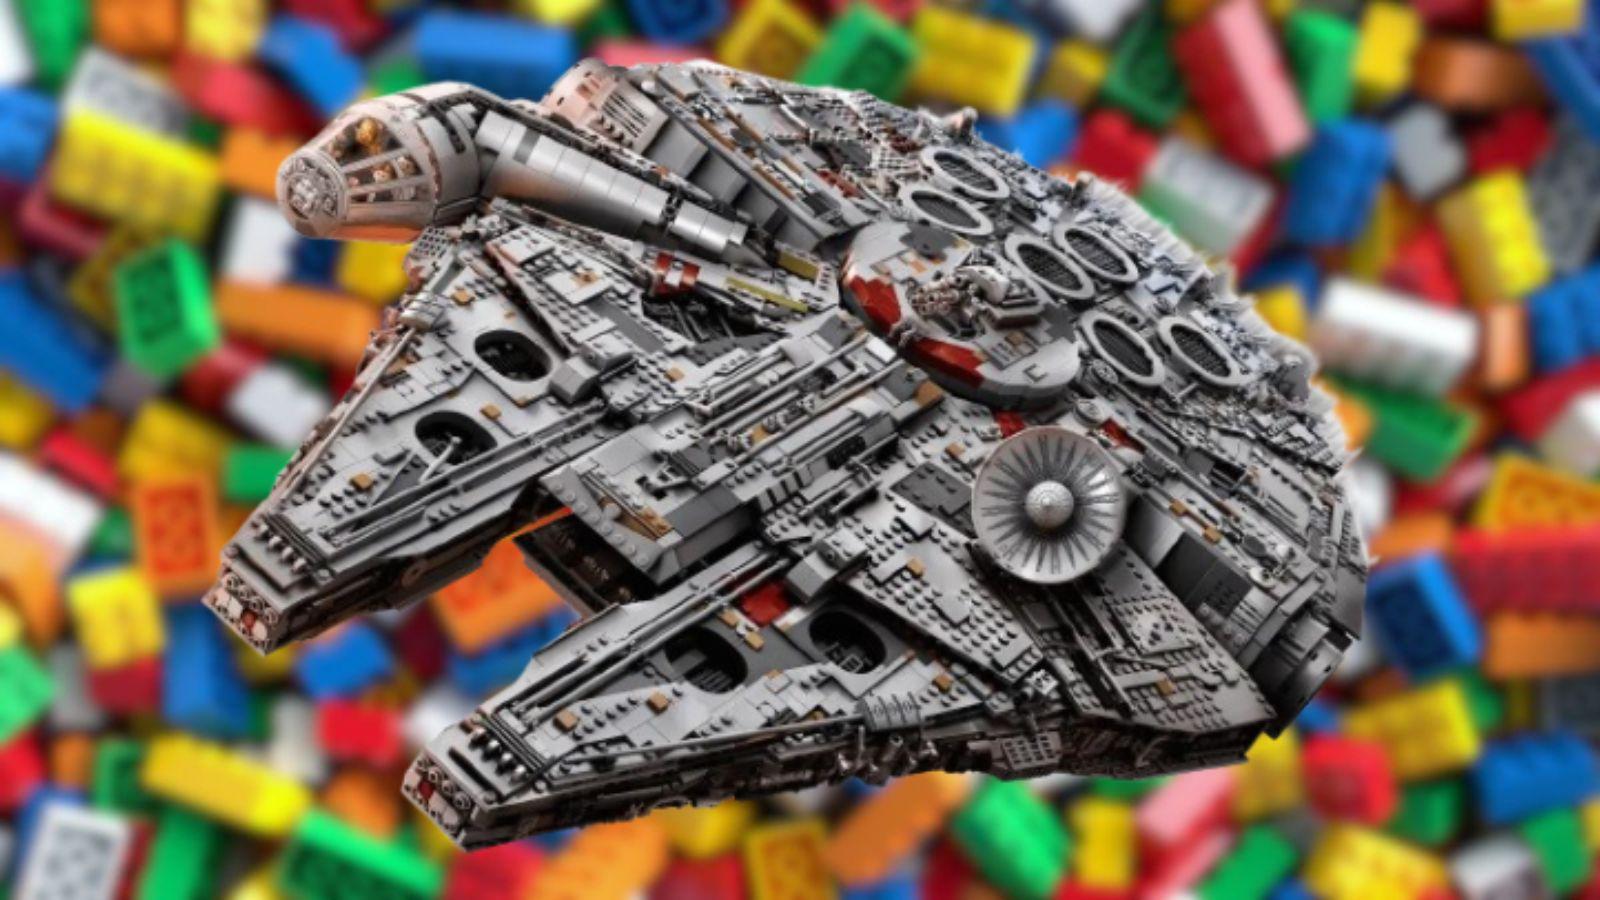 The UCS Millennium Falcon (Ultimate Collector's Series Story)